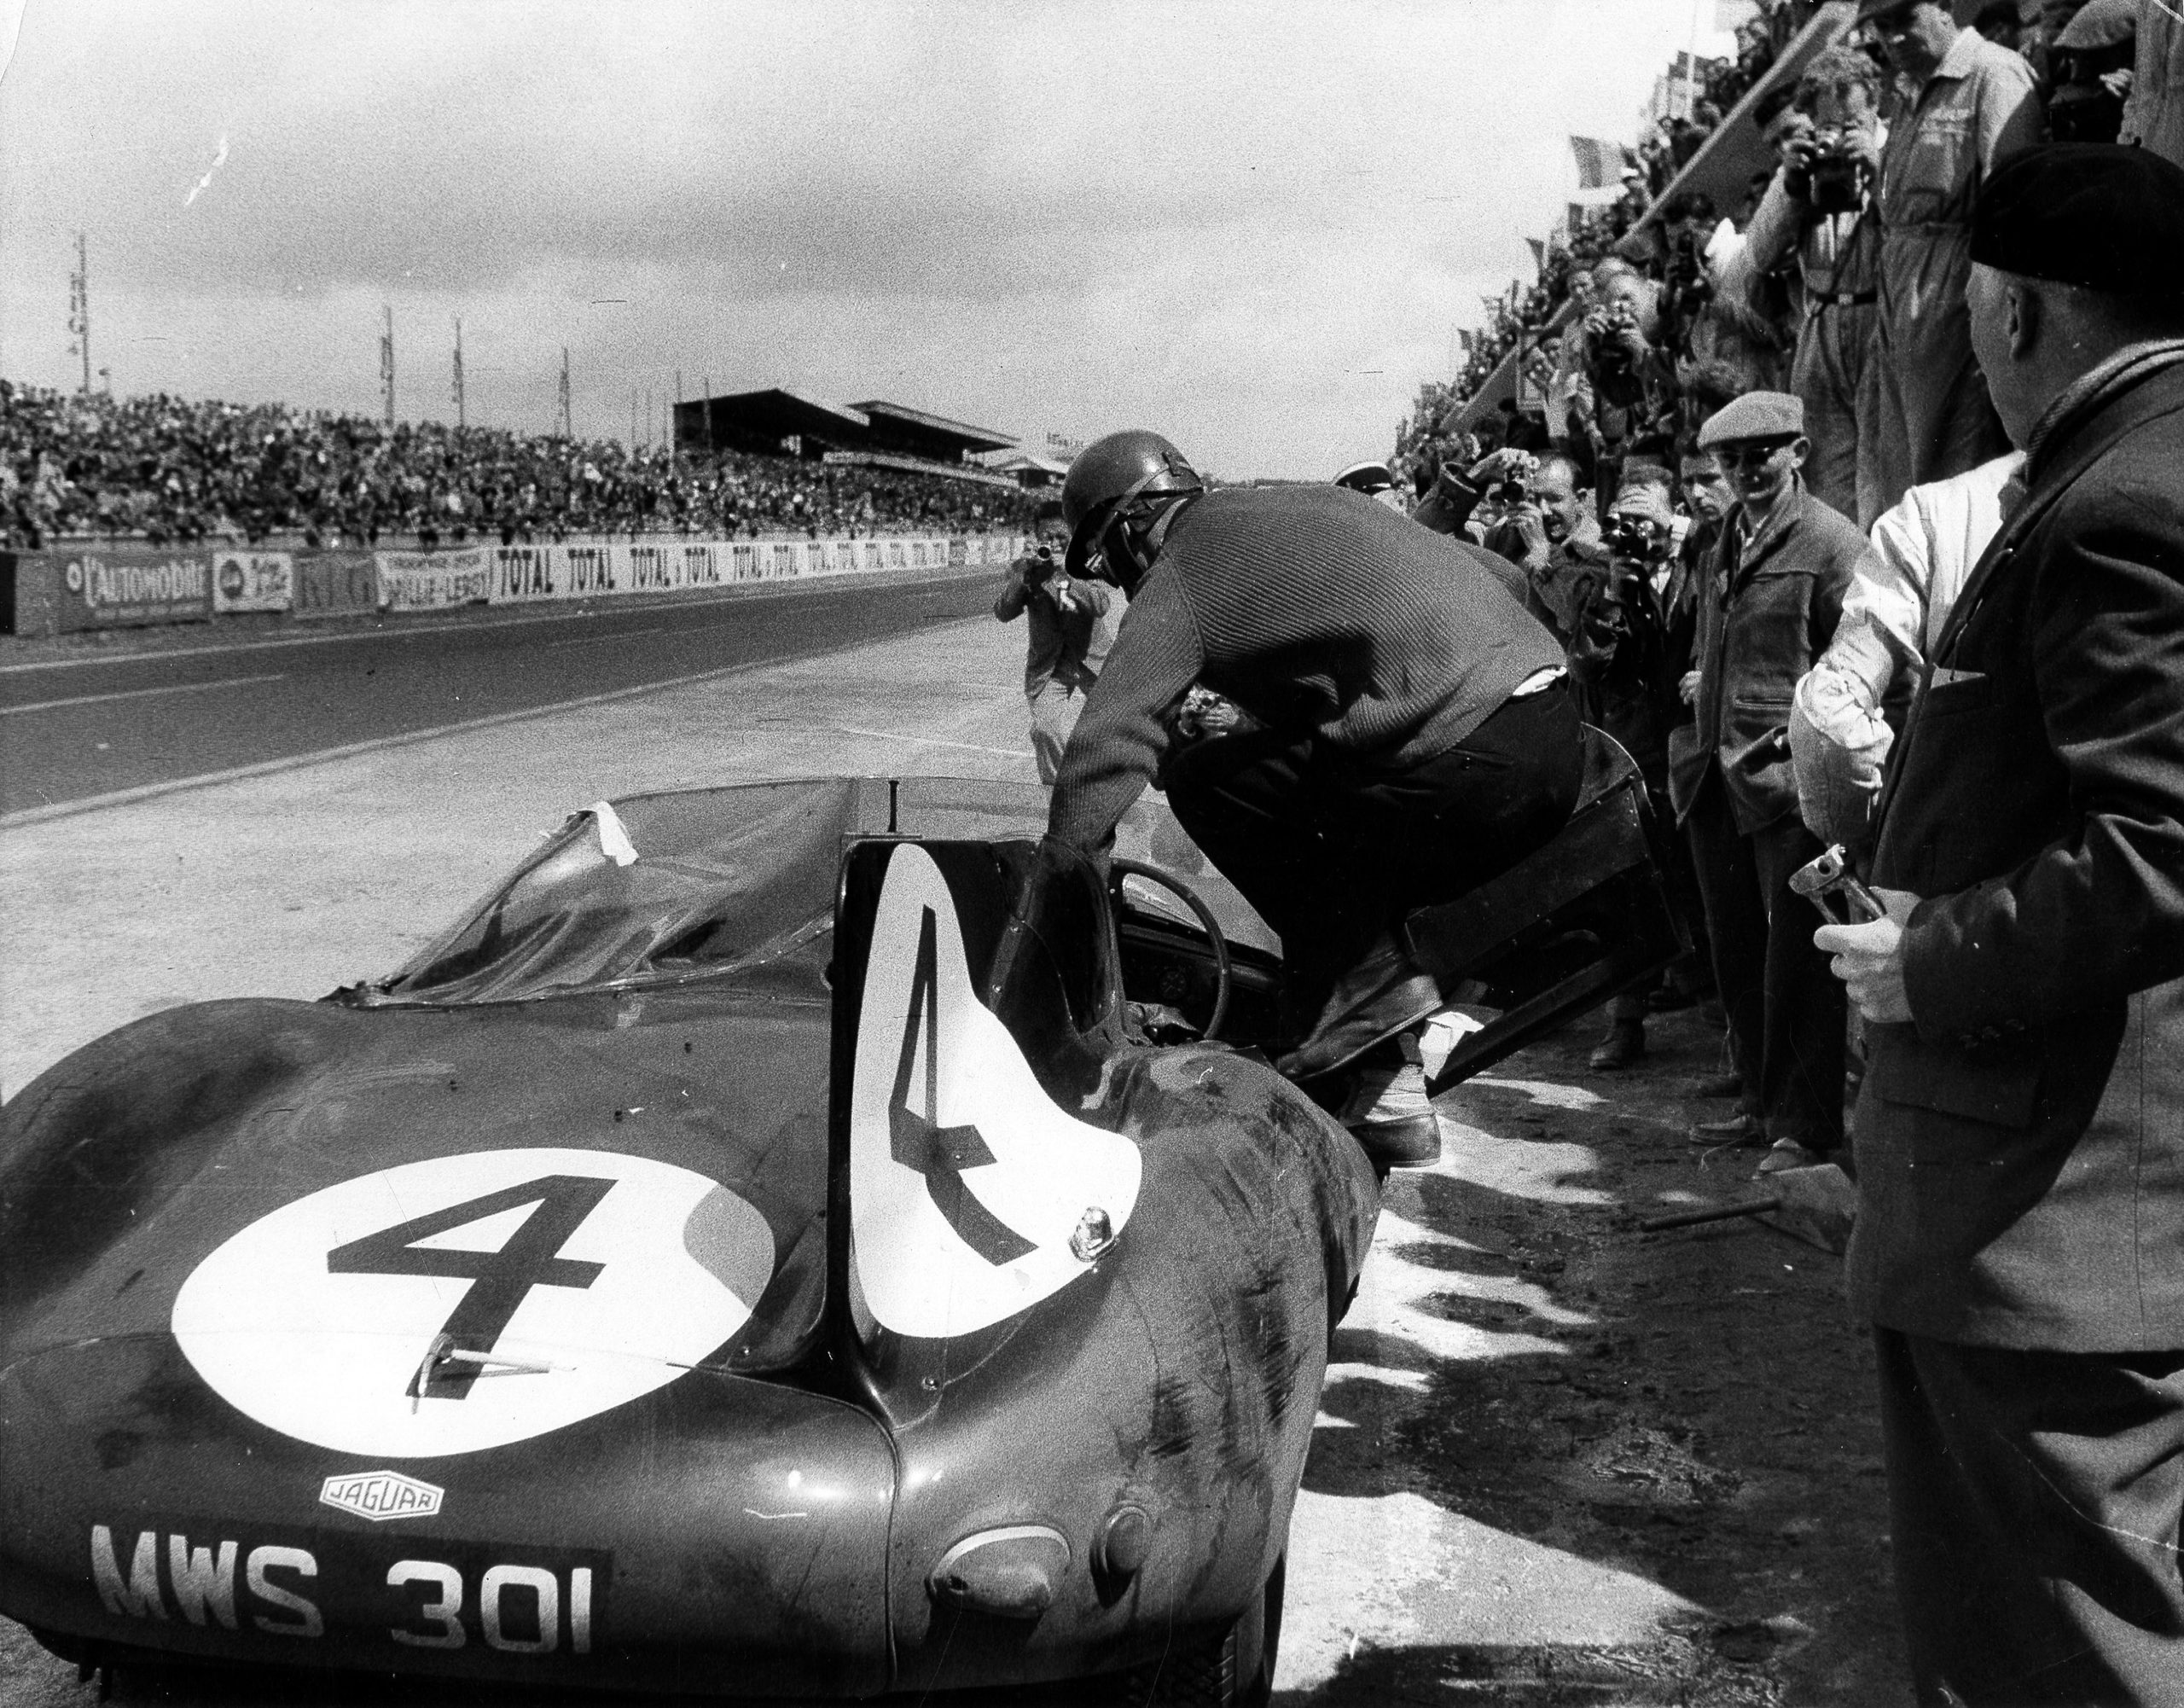 In this spectacular driver change the fascinating design of the rear fin that characterizes the D-Type is clearly visible. It’s 1956 and the Ecurie Ecosse car driven by Ron Flockhart and Ninian Sanderson is on its way to victory